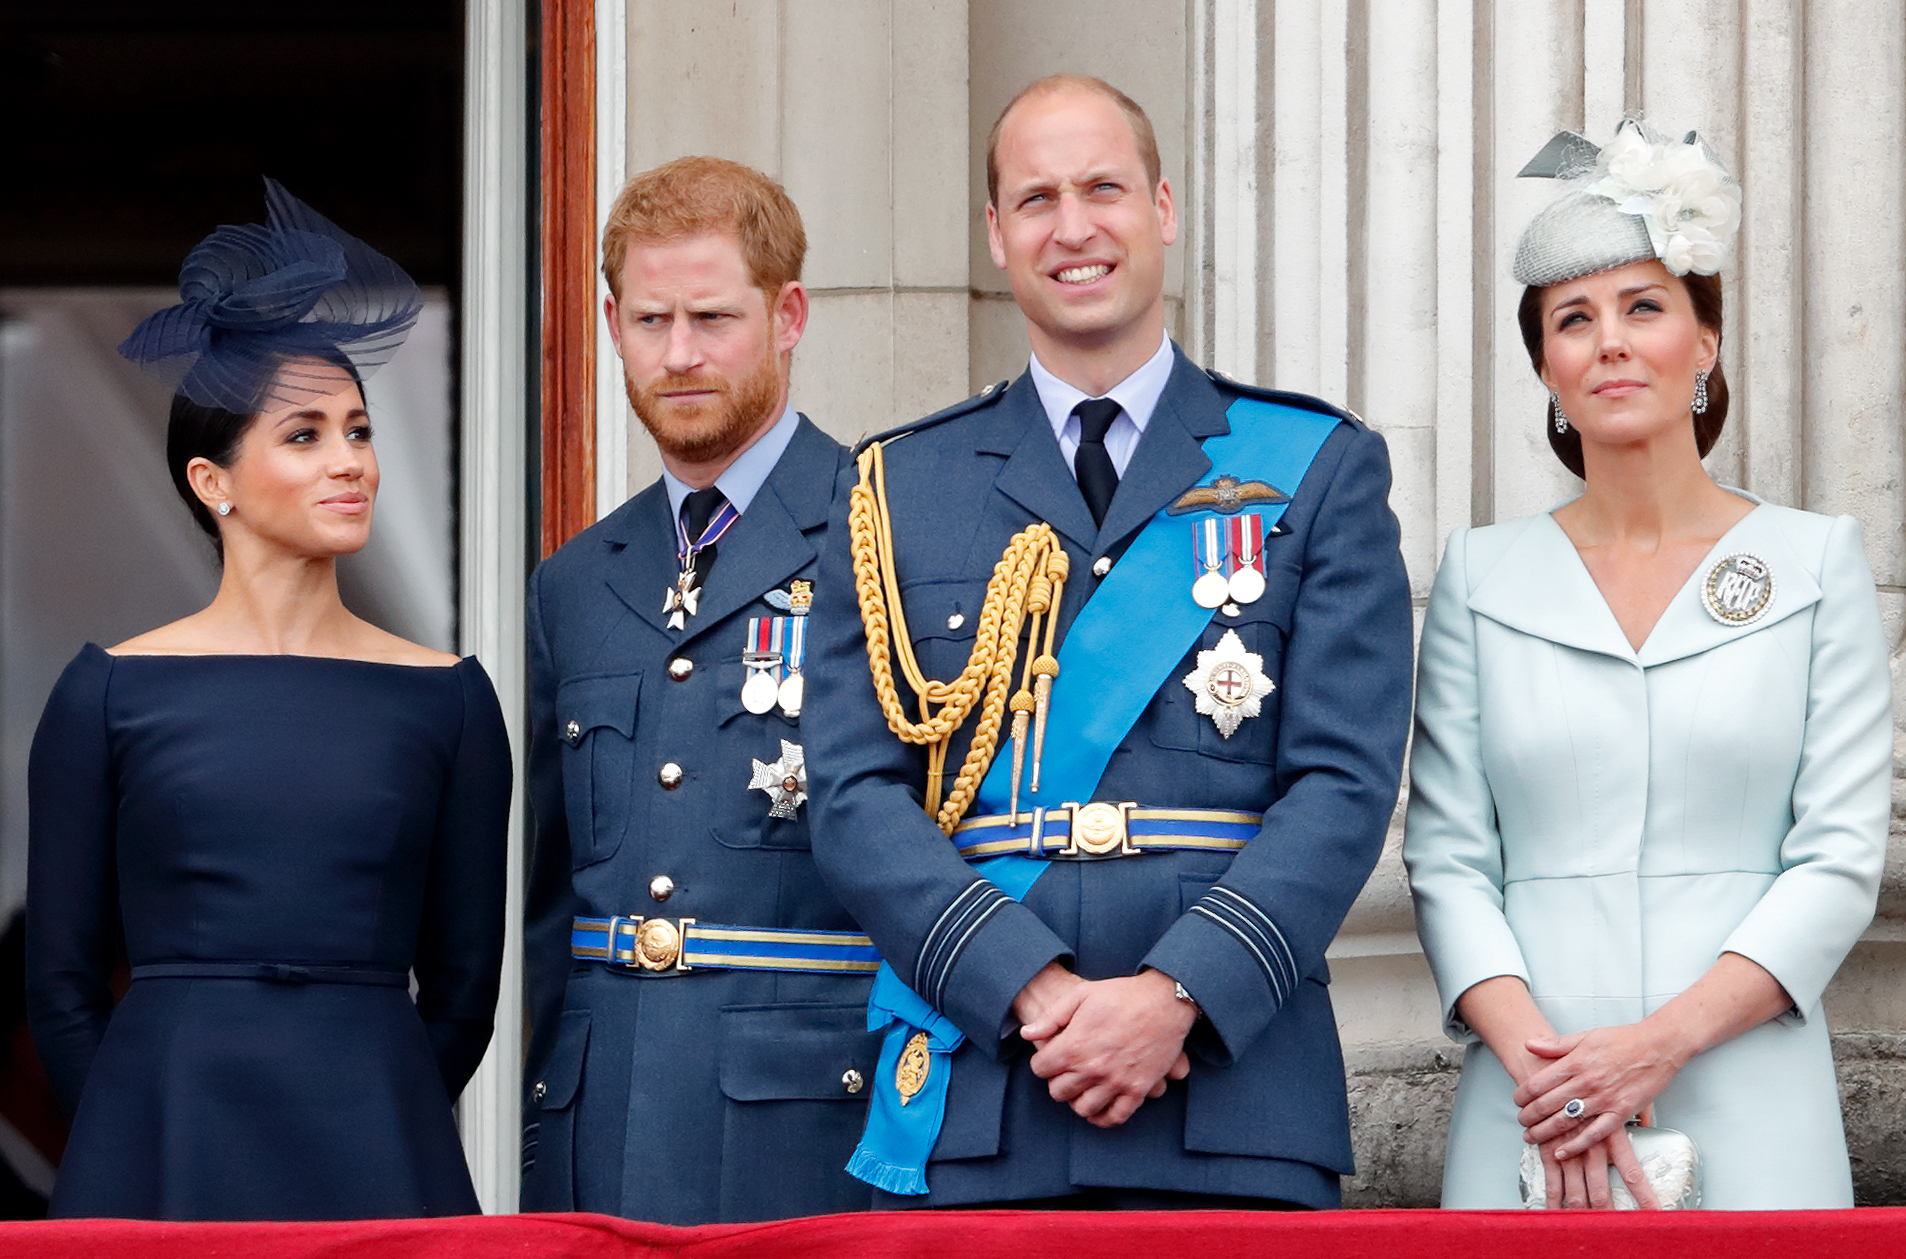 Meghan Markle, Prince Harry, Prince William and Kate Middleton on the balcony of Buckingham Palace in April 2018